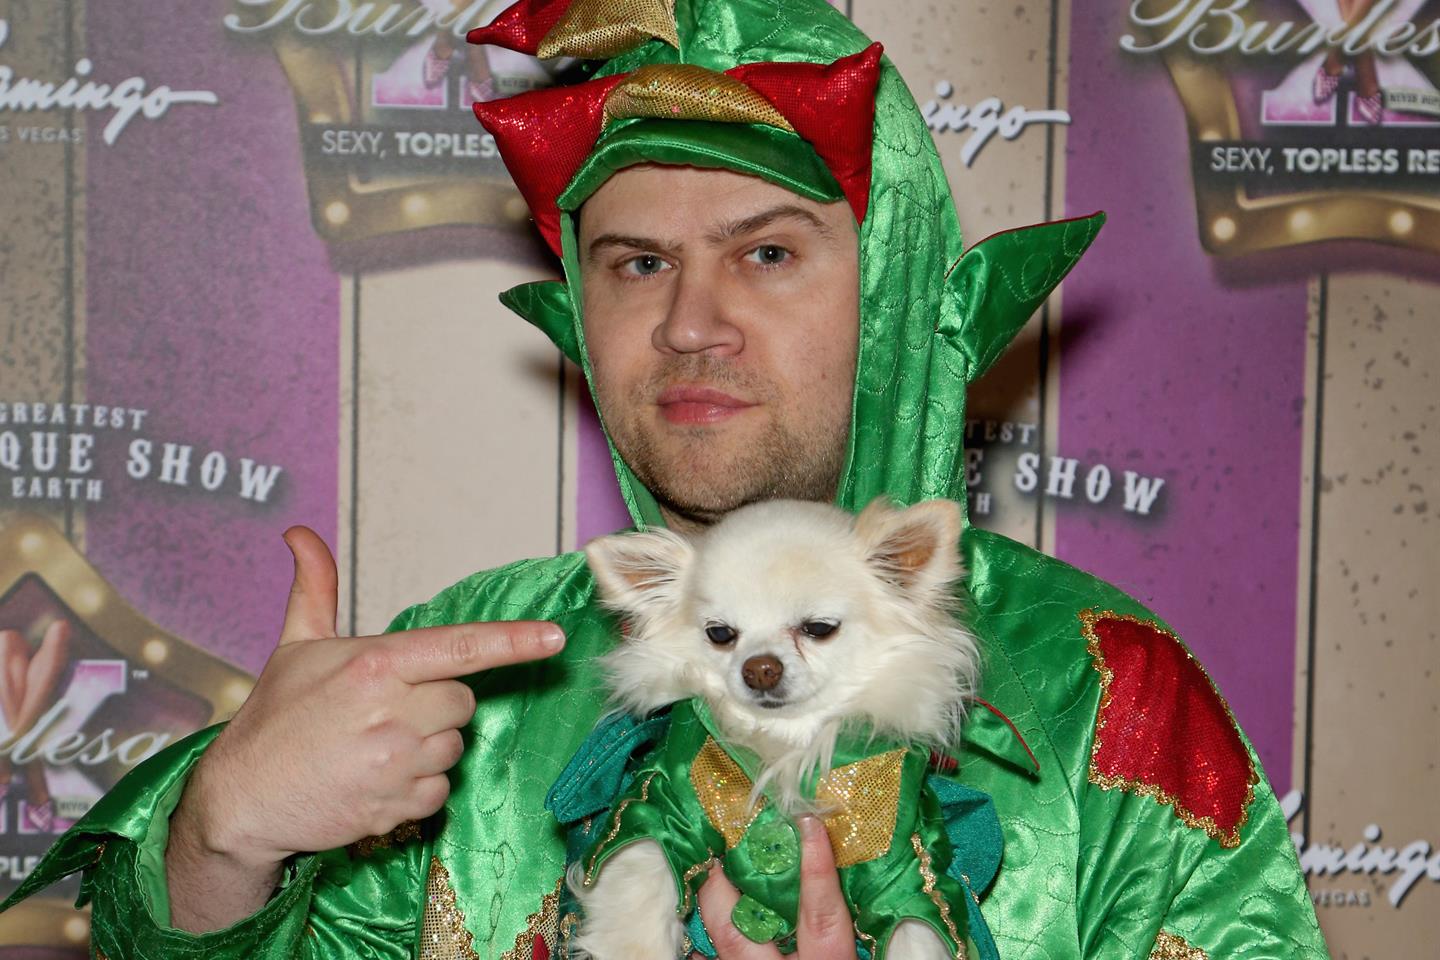 Piff the Magic Dragon Tour Tickets Buy and sell Piff the Magic Dragon Tour Tickets